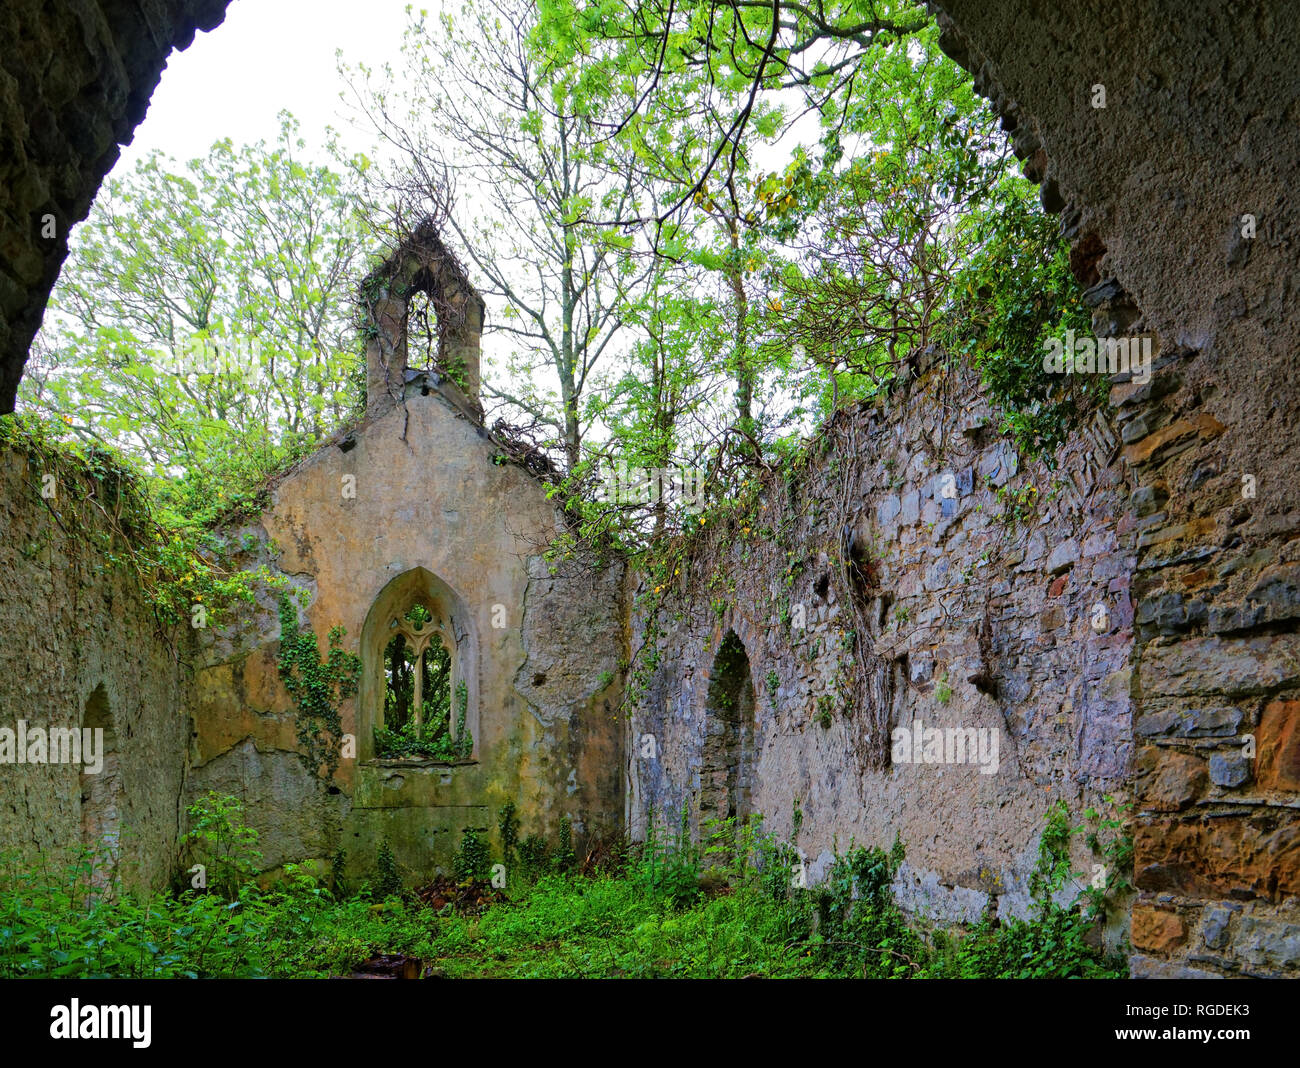 42,517.02903 empty abandoned ancient crumbling and falling down 1400's vine covered stone rock church in Haverfordwest, Wales, Great Britain Europe Stock Photo